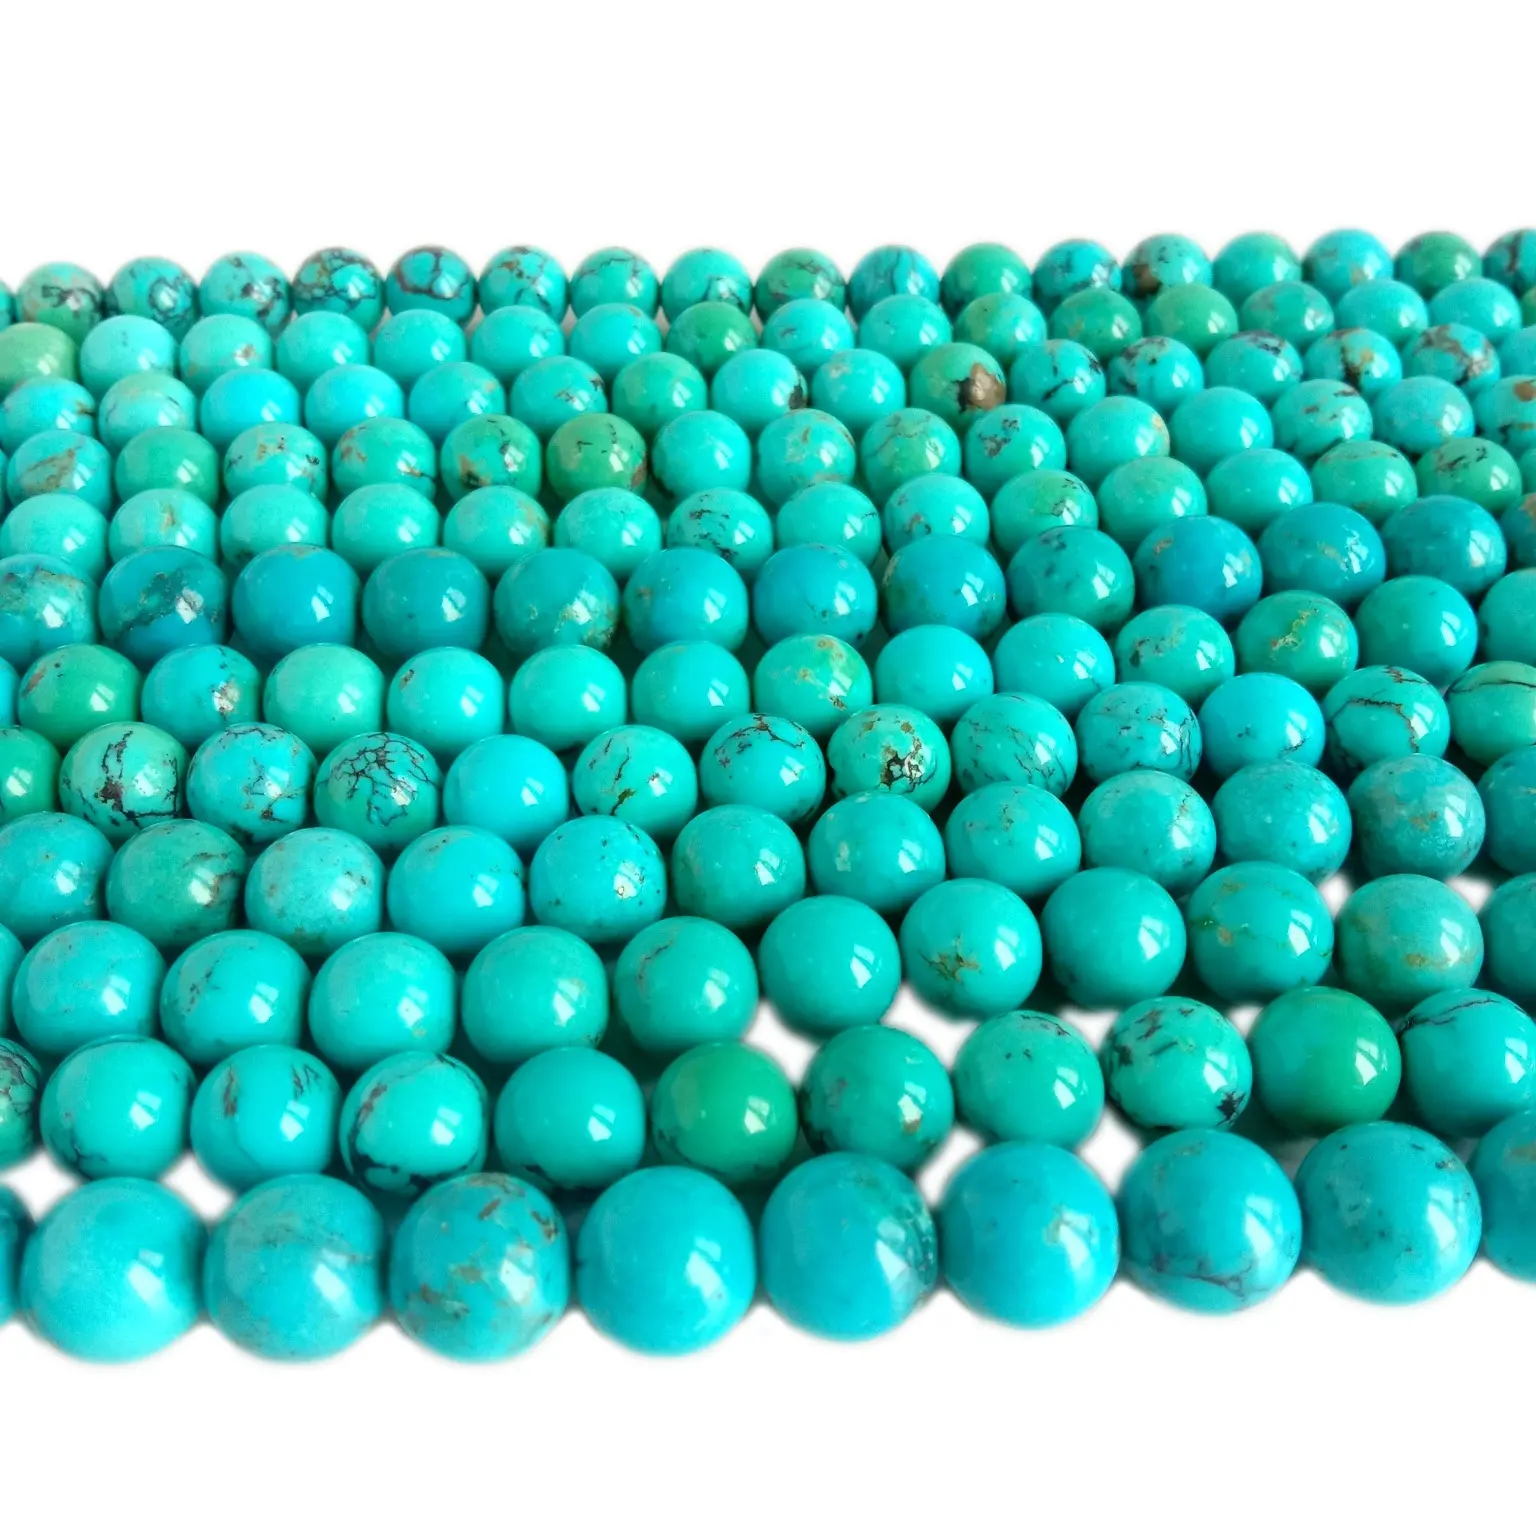 Turquoise Round beads blue Turquoise Smooth beads 8mm Turquoise beads 16 inch strand